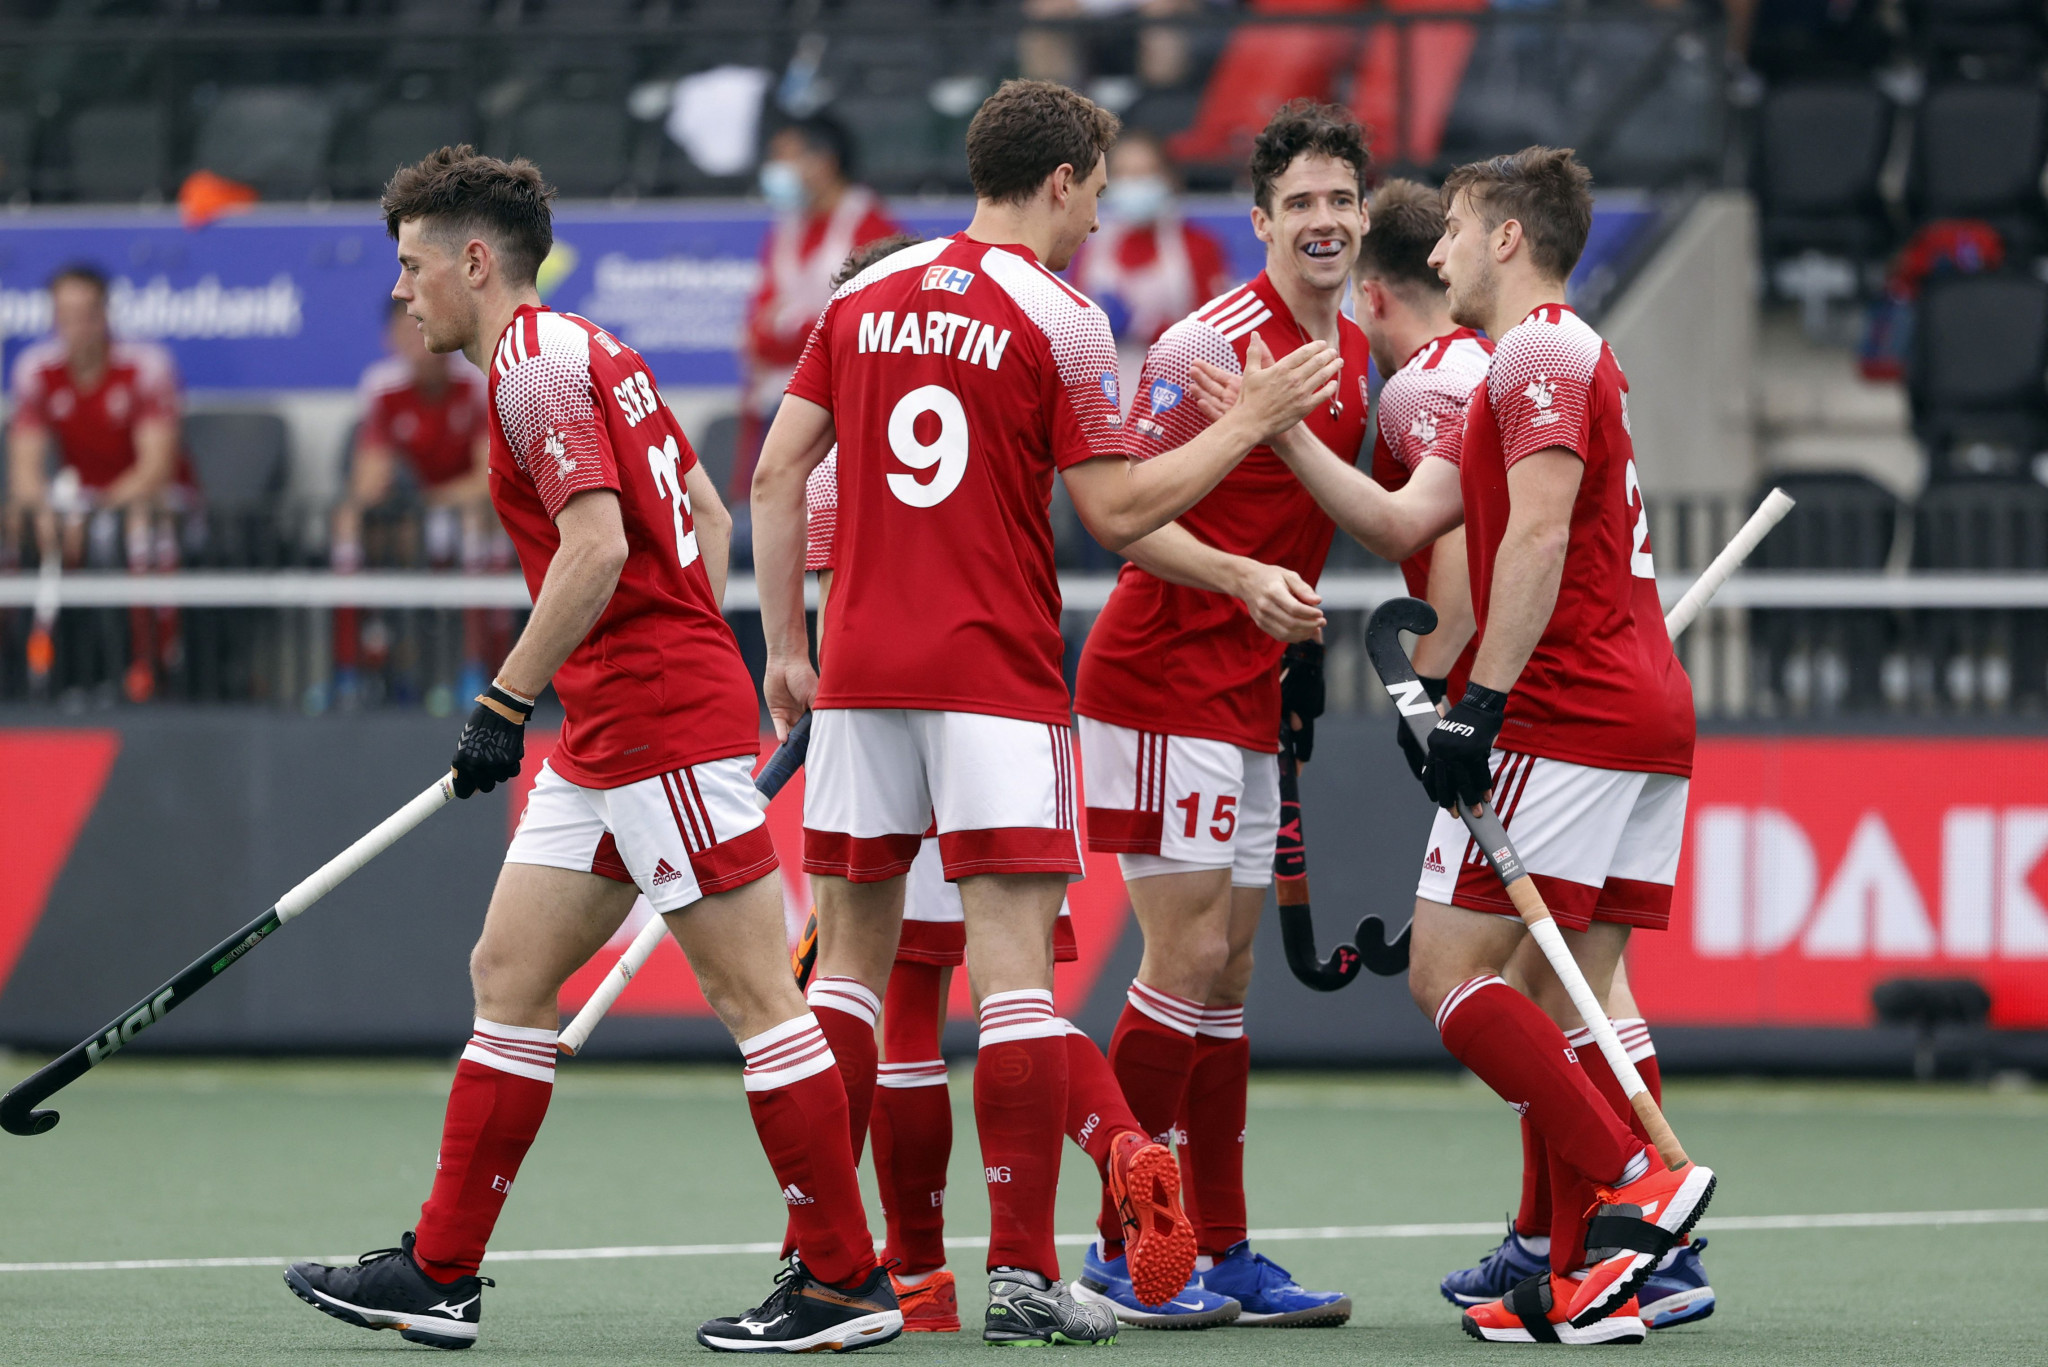 England pull off double victory in hockey's Pro League